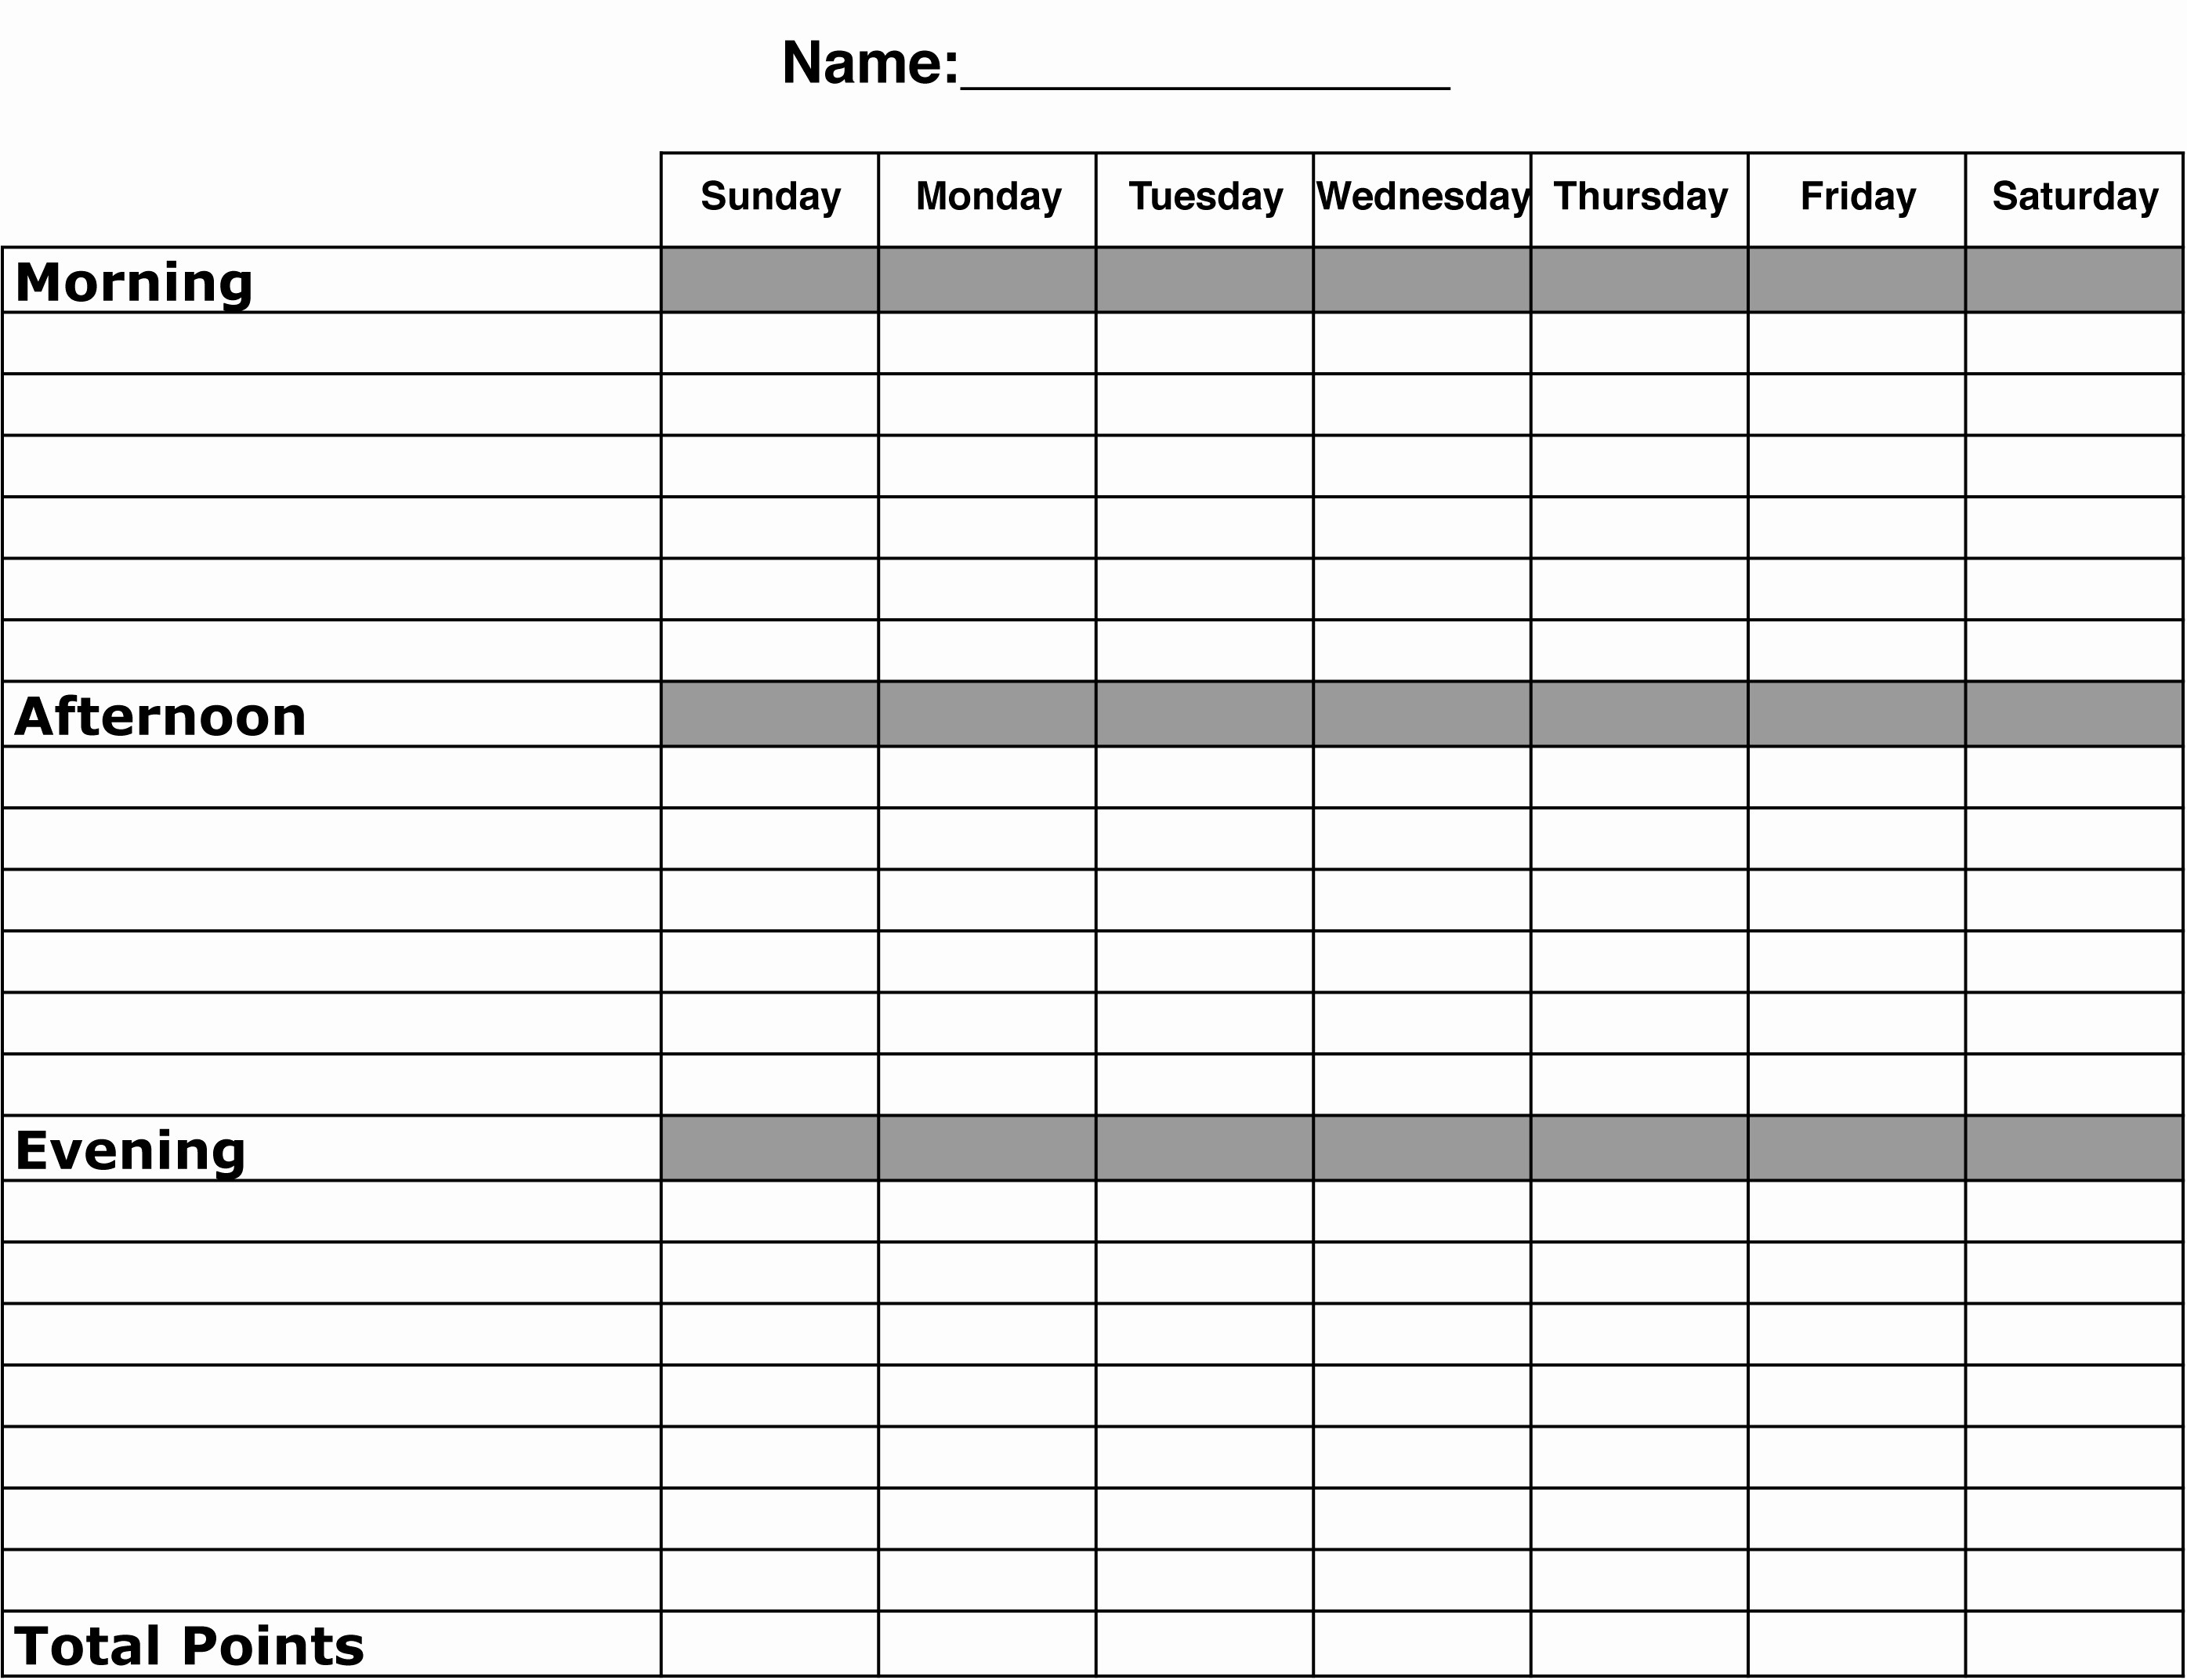 Blank Chore Chart For Adults